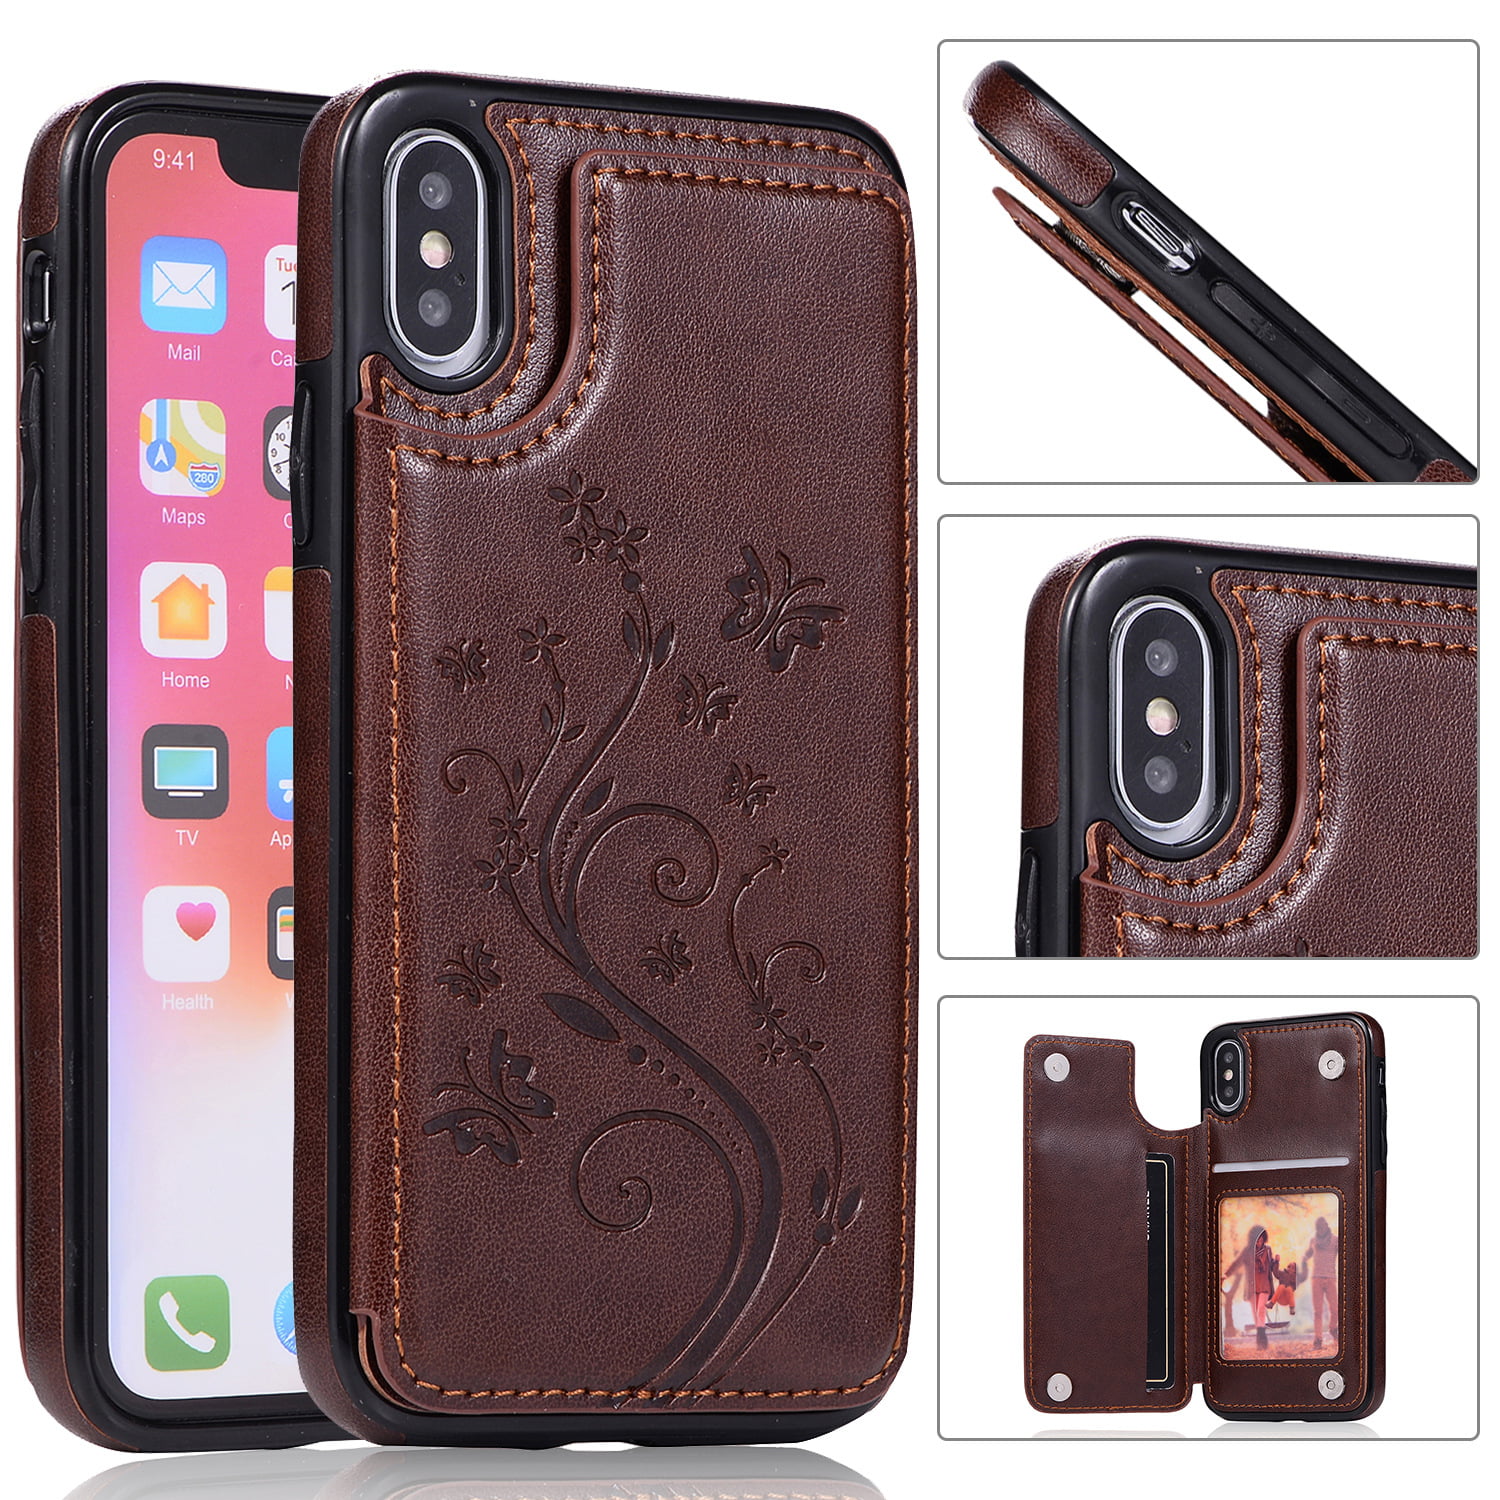 iPhone Xs Max, Black for iPhone X/XS|XR|XS Max Wallet Case PU Leather TPU Bumper Flip Standing Purse Magnetic 360 Full Body Cover with ID Credit Card Slot 